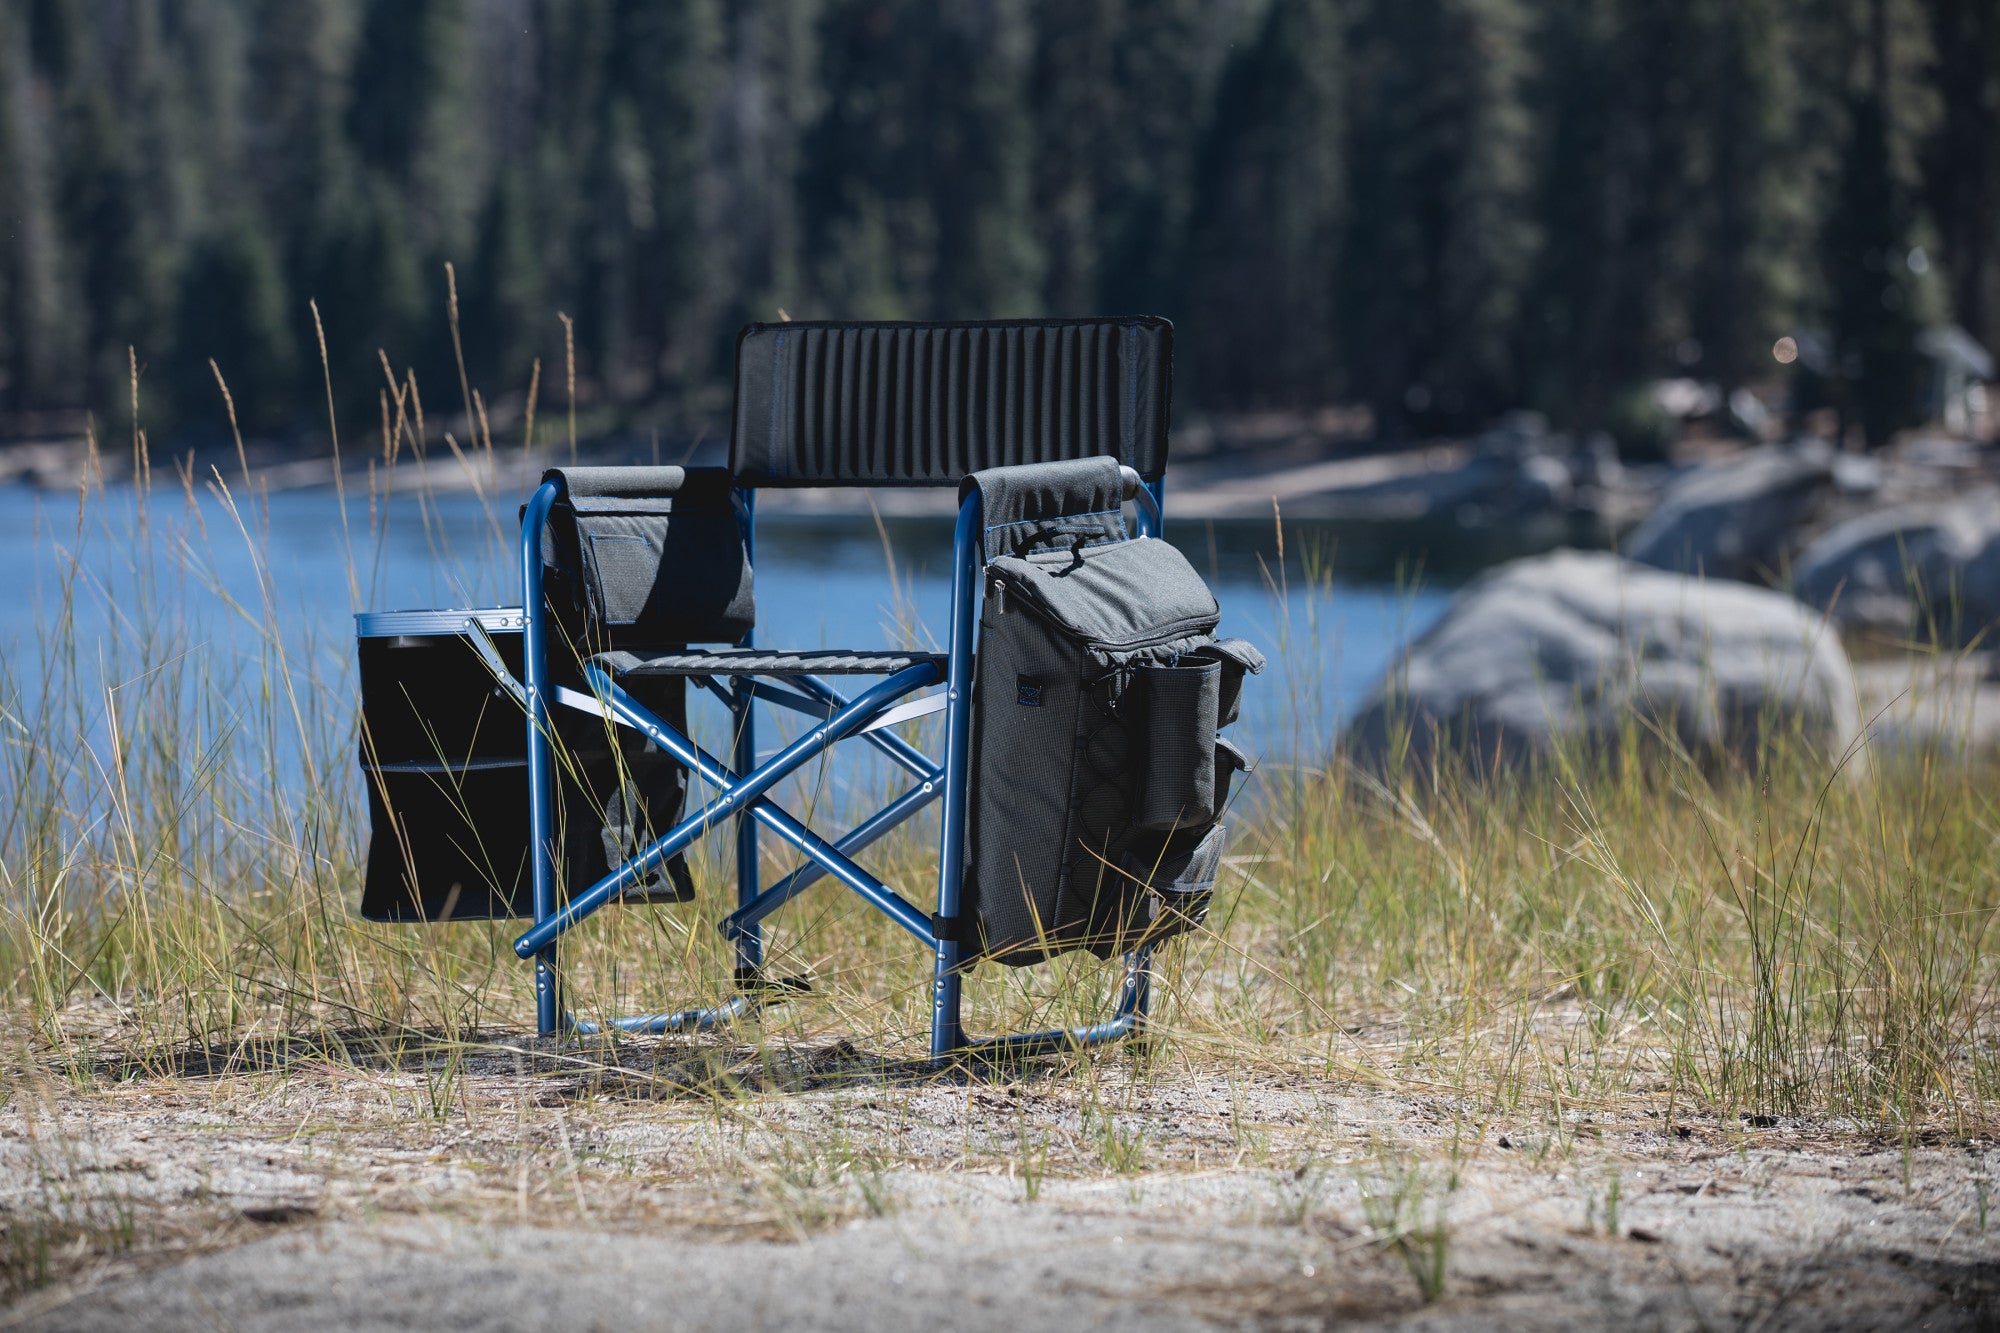 Boise State Broncos - Fusion Camping Chair